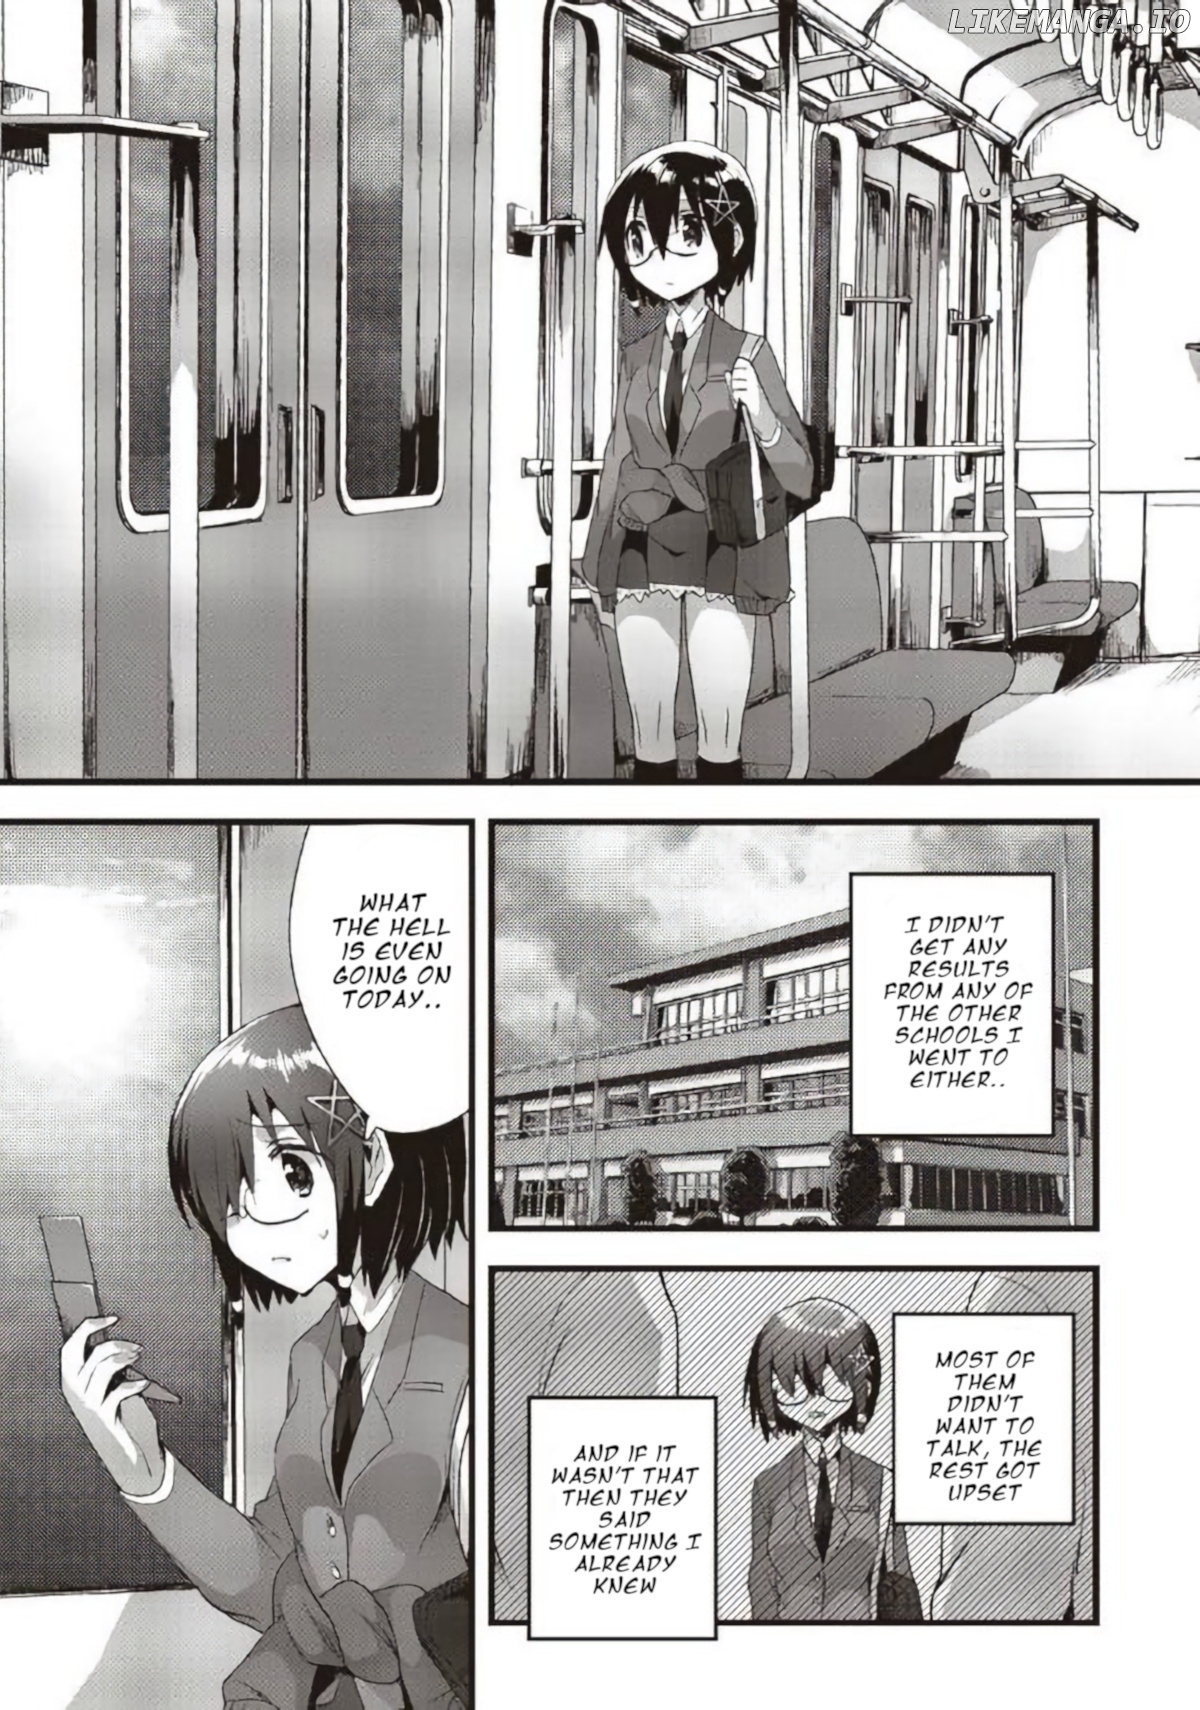 Corpse Party Cemetery 0 - Kaibyaku no Ars Moriendi chapter 13 - page 20